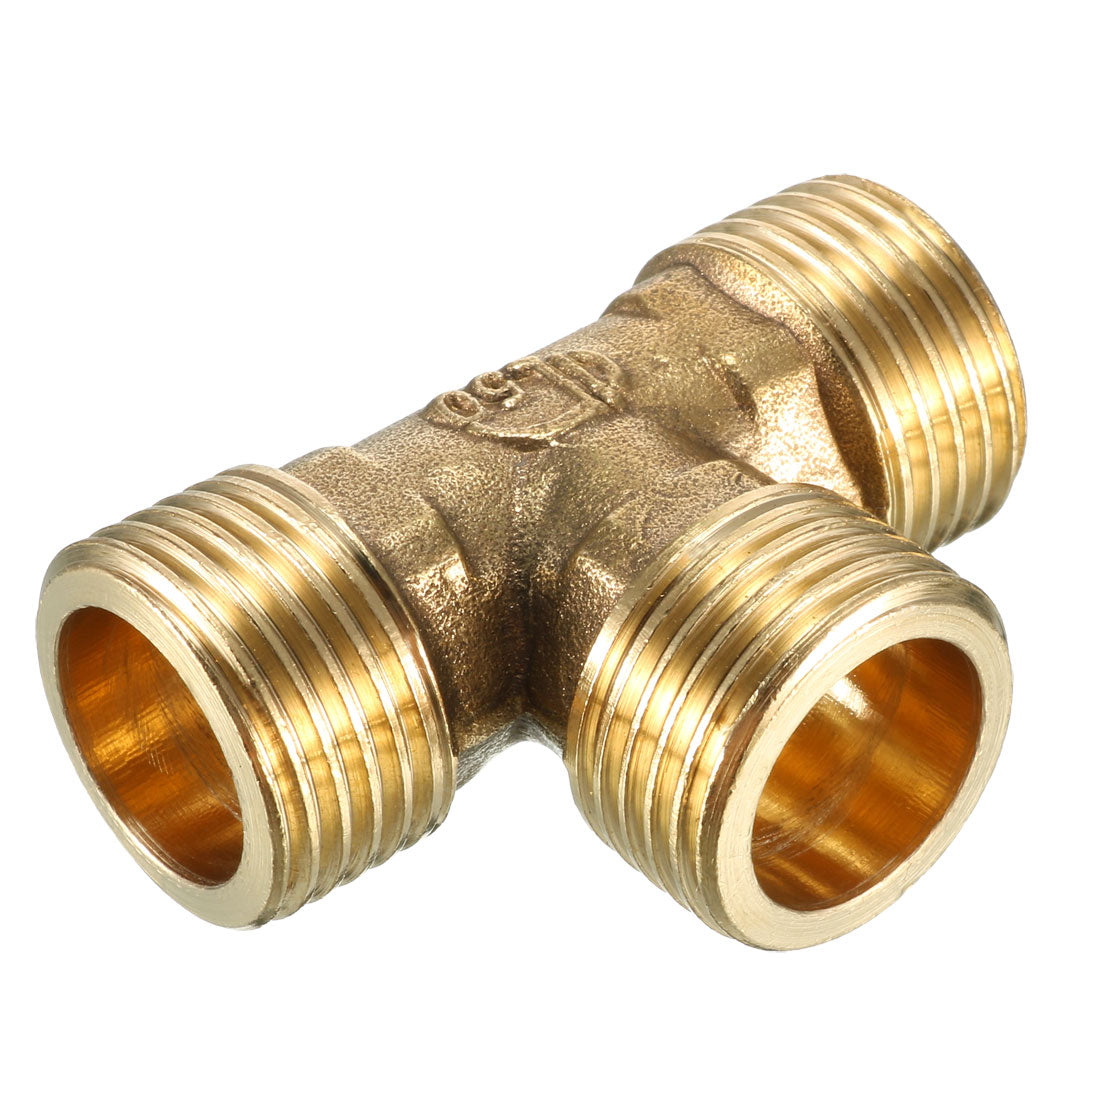 uxcell Uxcell Brass Tee Pipe Fitting 1/2 PT Male Thread T Shaped Connector Coupler